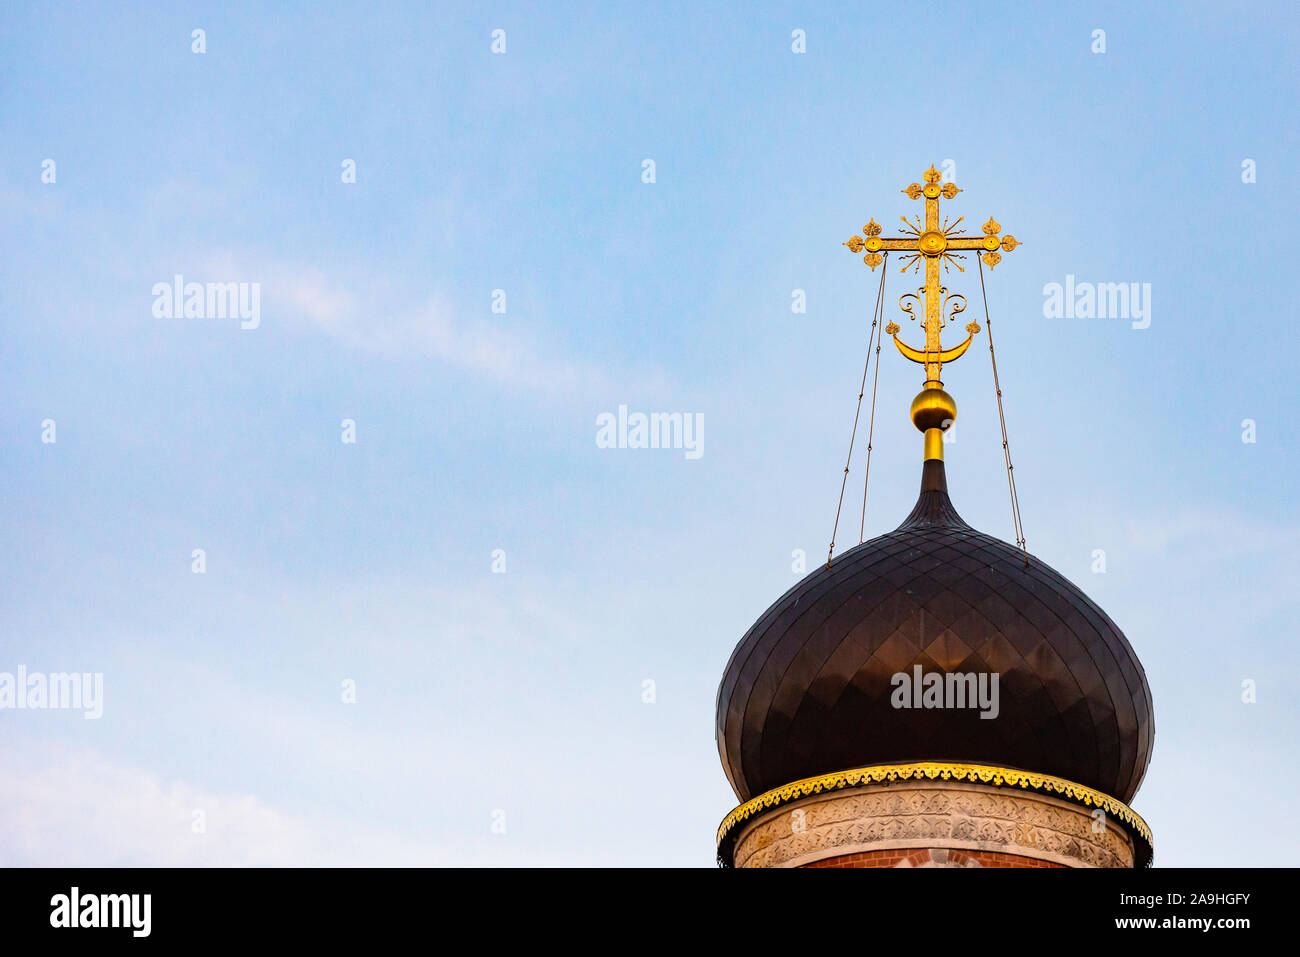 Golden cross on the dome. The dome of the Orthodox Church against the sky. Stock Photo